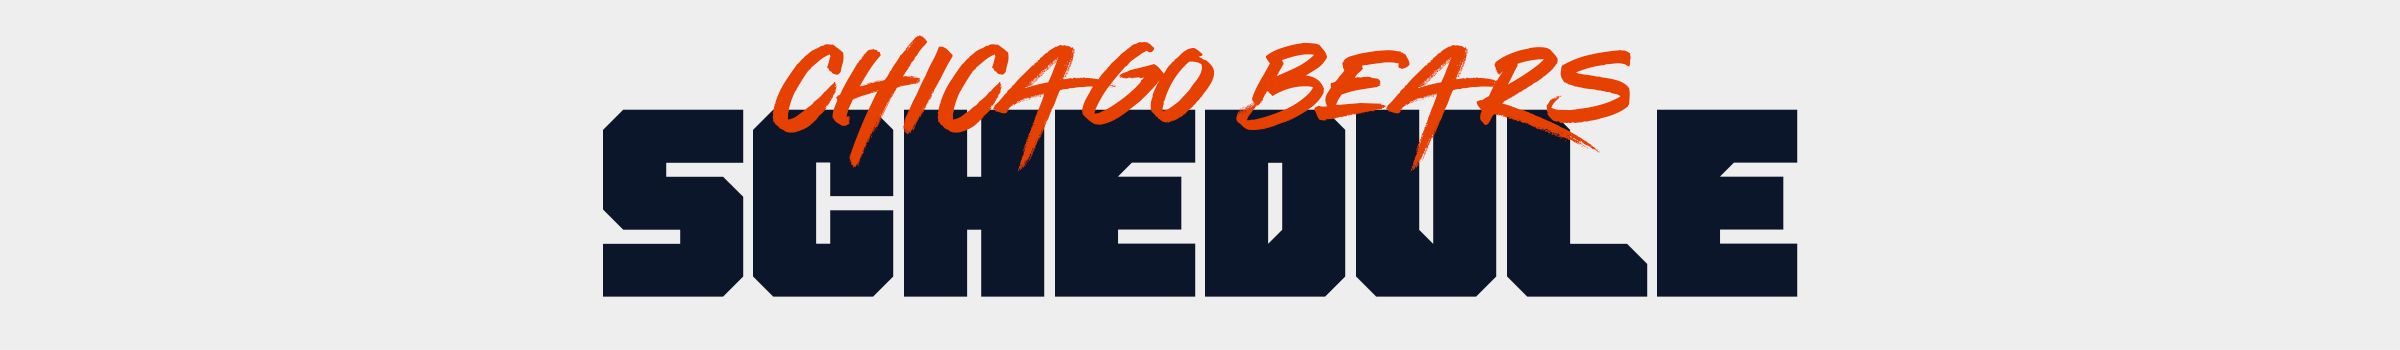 Schedule | The Official Website Of The Chicago Bears